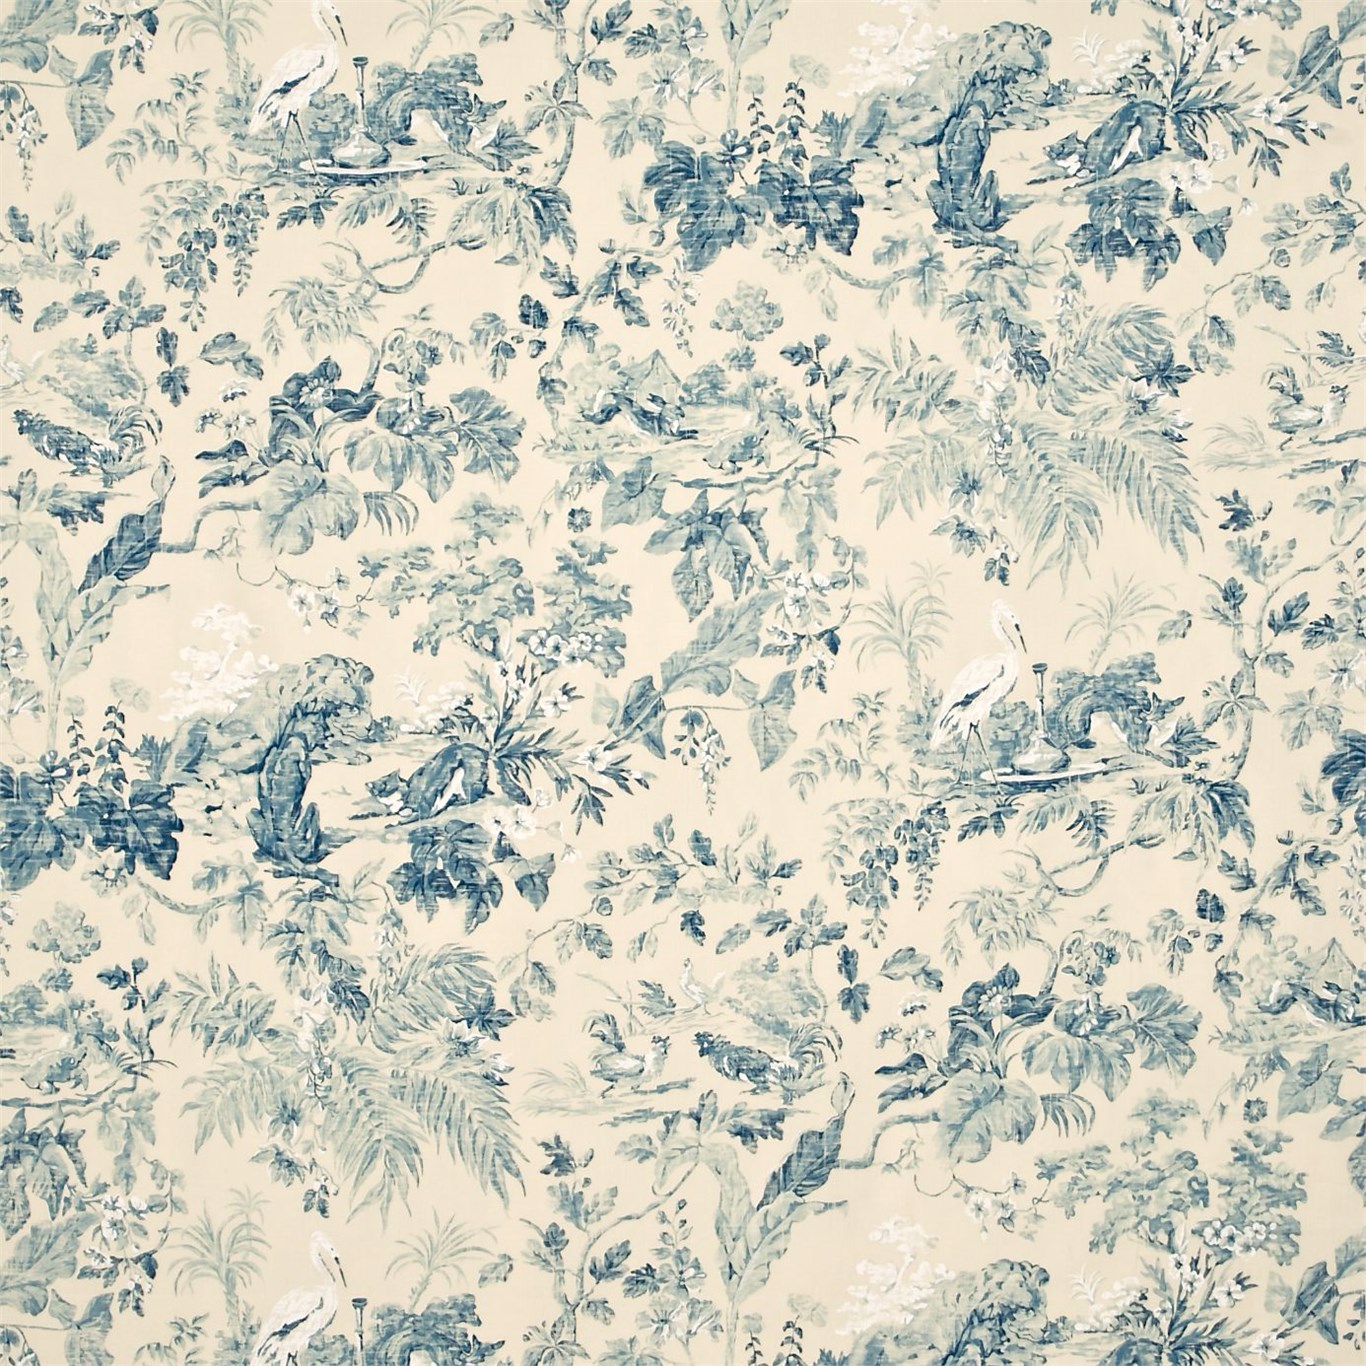 Aesops Fables Blue Fabric by SAN